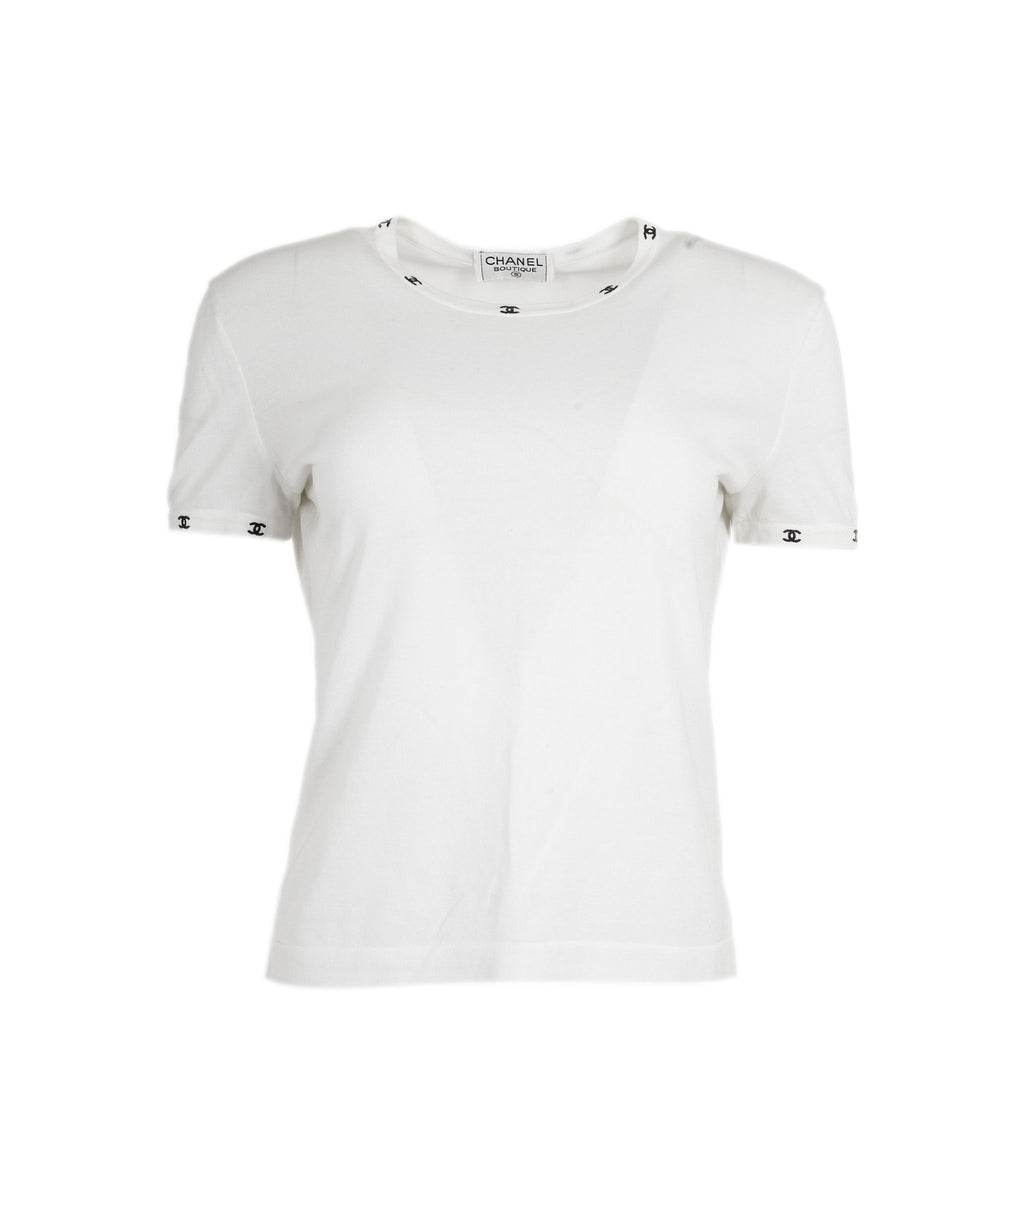 Chanel vintage white t shirt, w/ cc details along collar and short sle ...